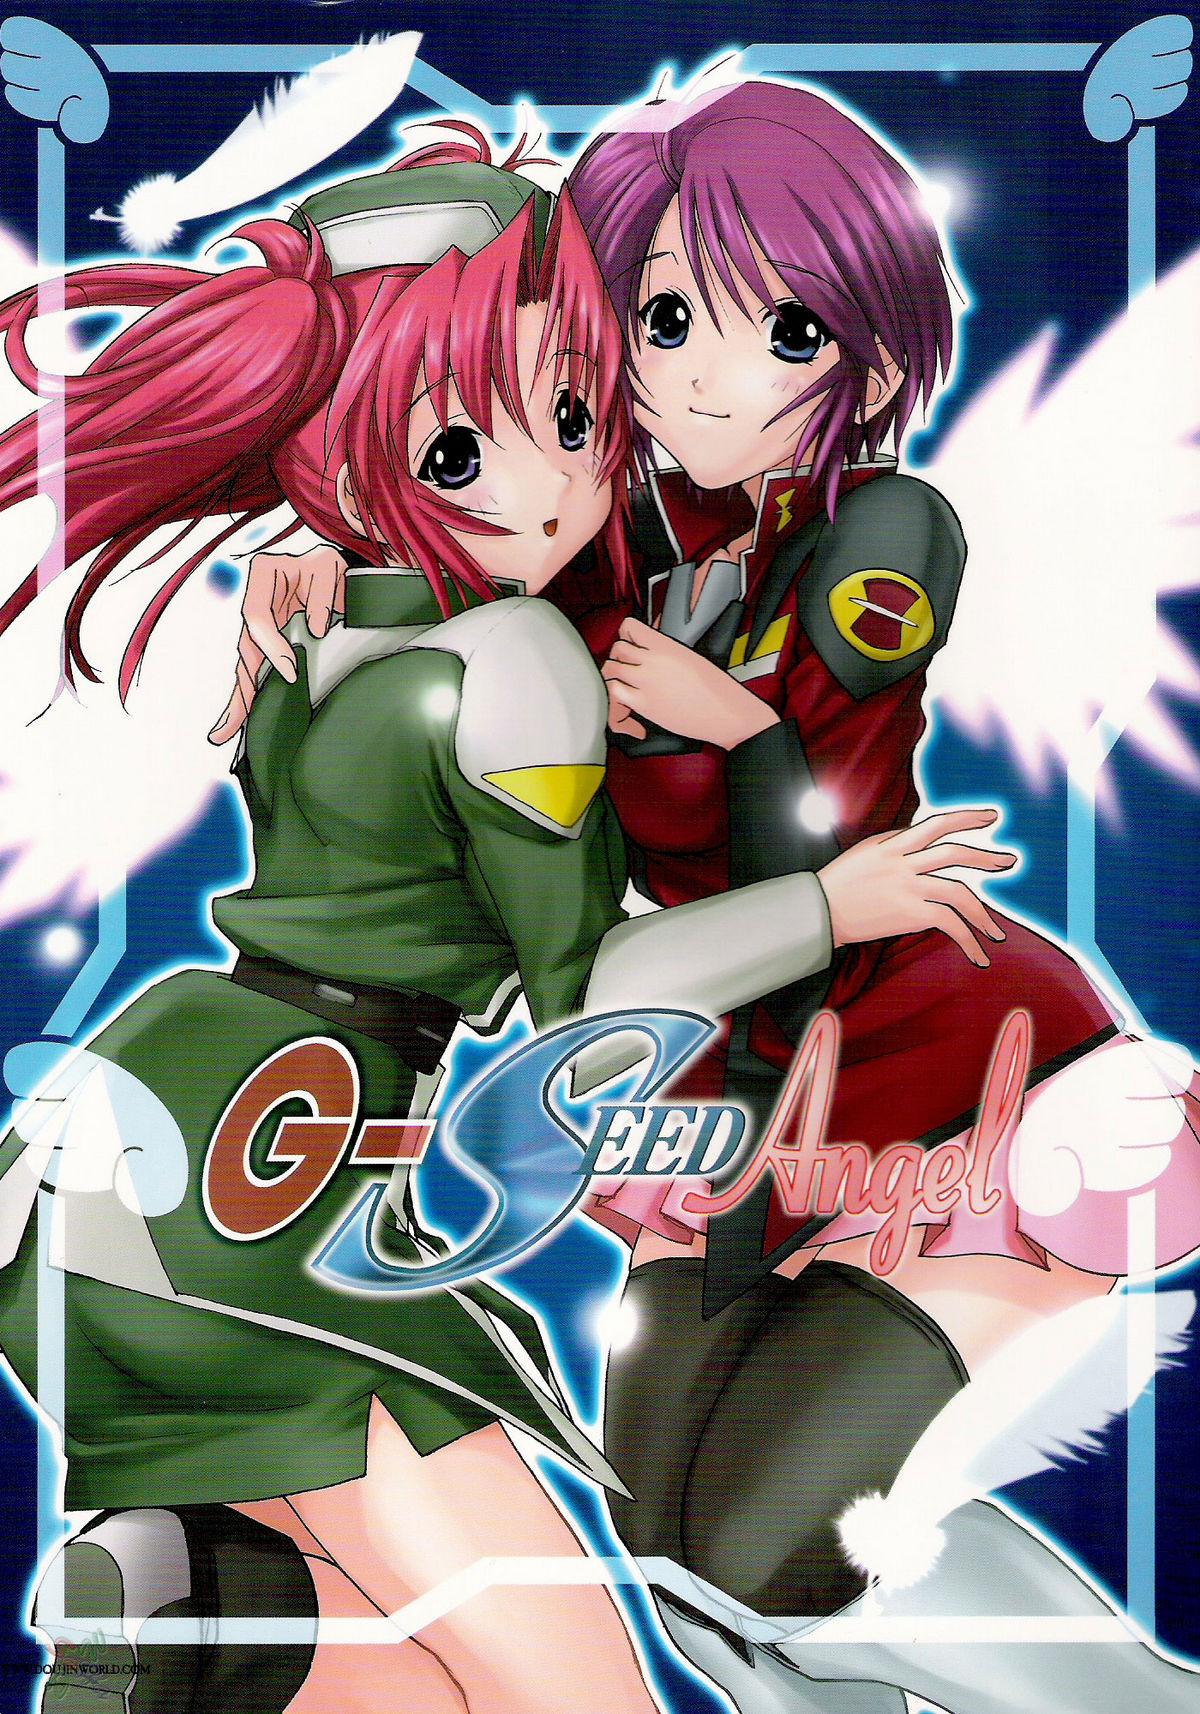 Small Tits G-SEED Angel - Gundam seed destiny Ejaculations - Picture 1